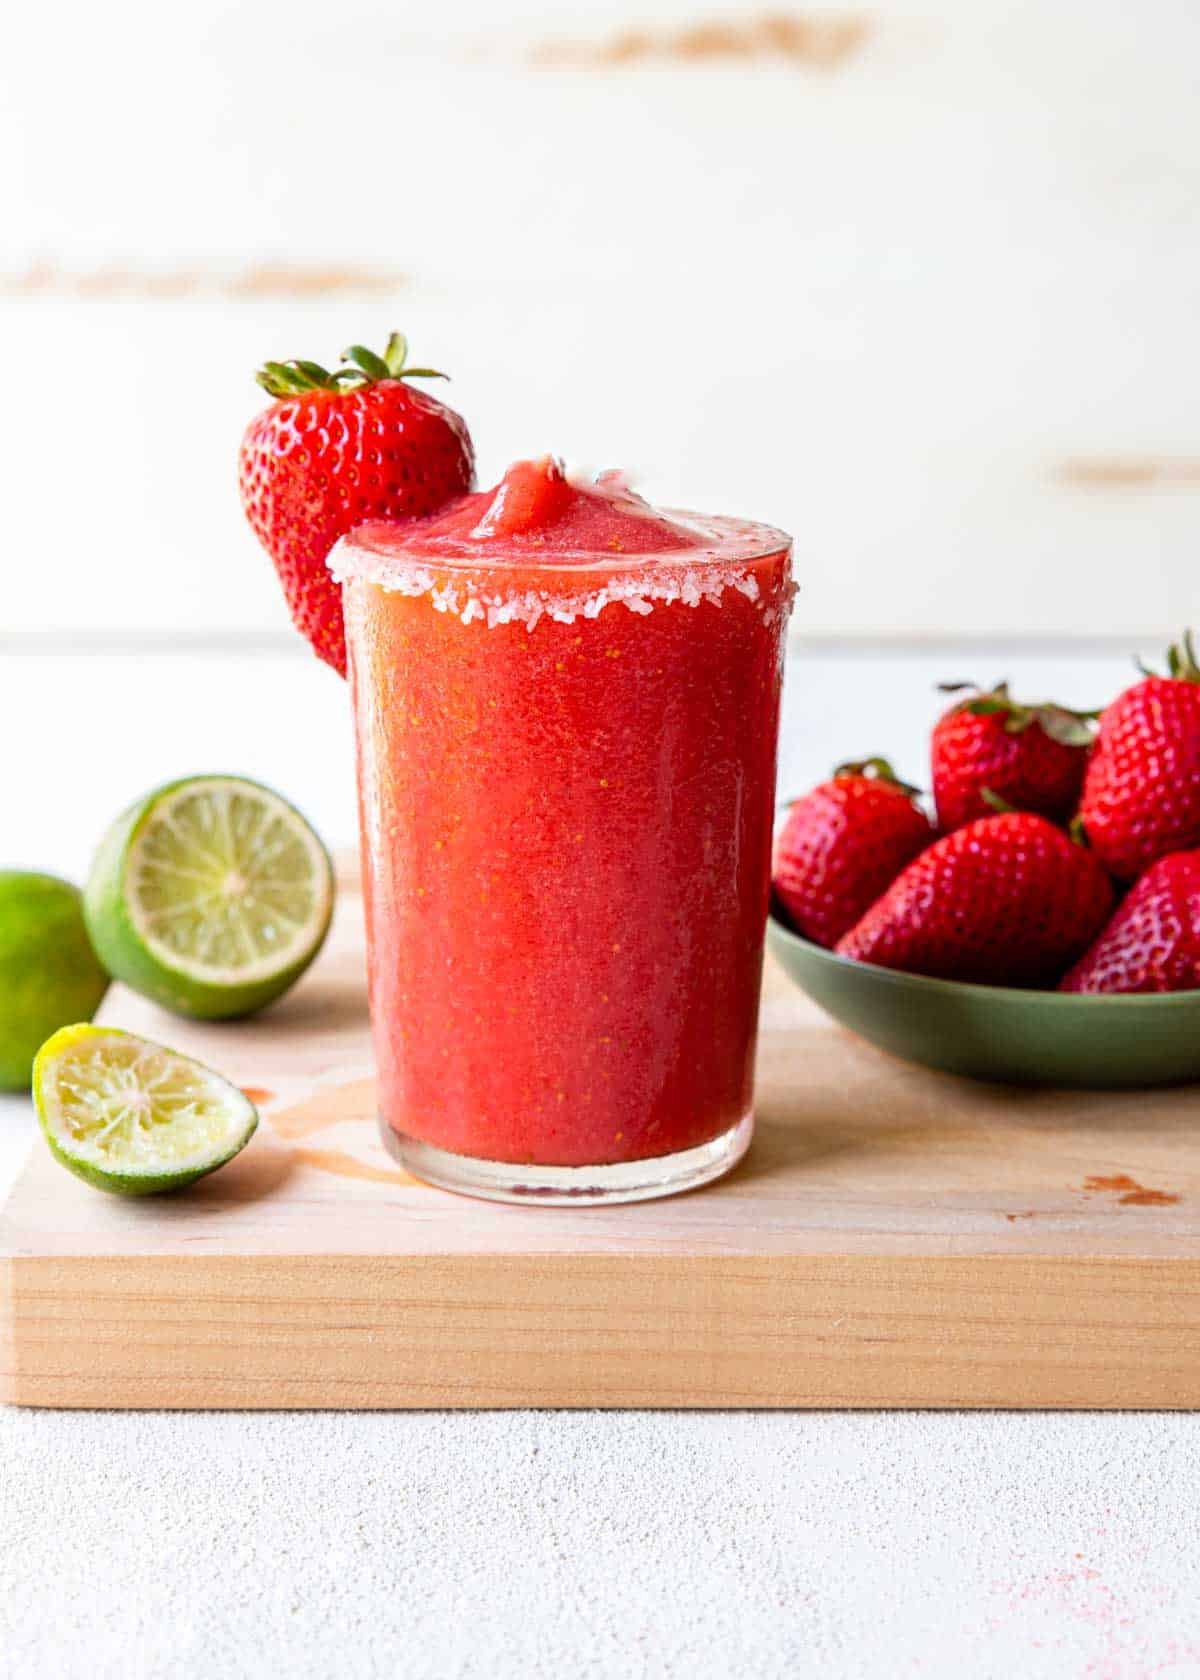 Frozen Strawberry margarita on a table with strawberries and limes